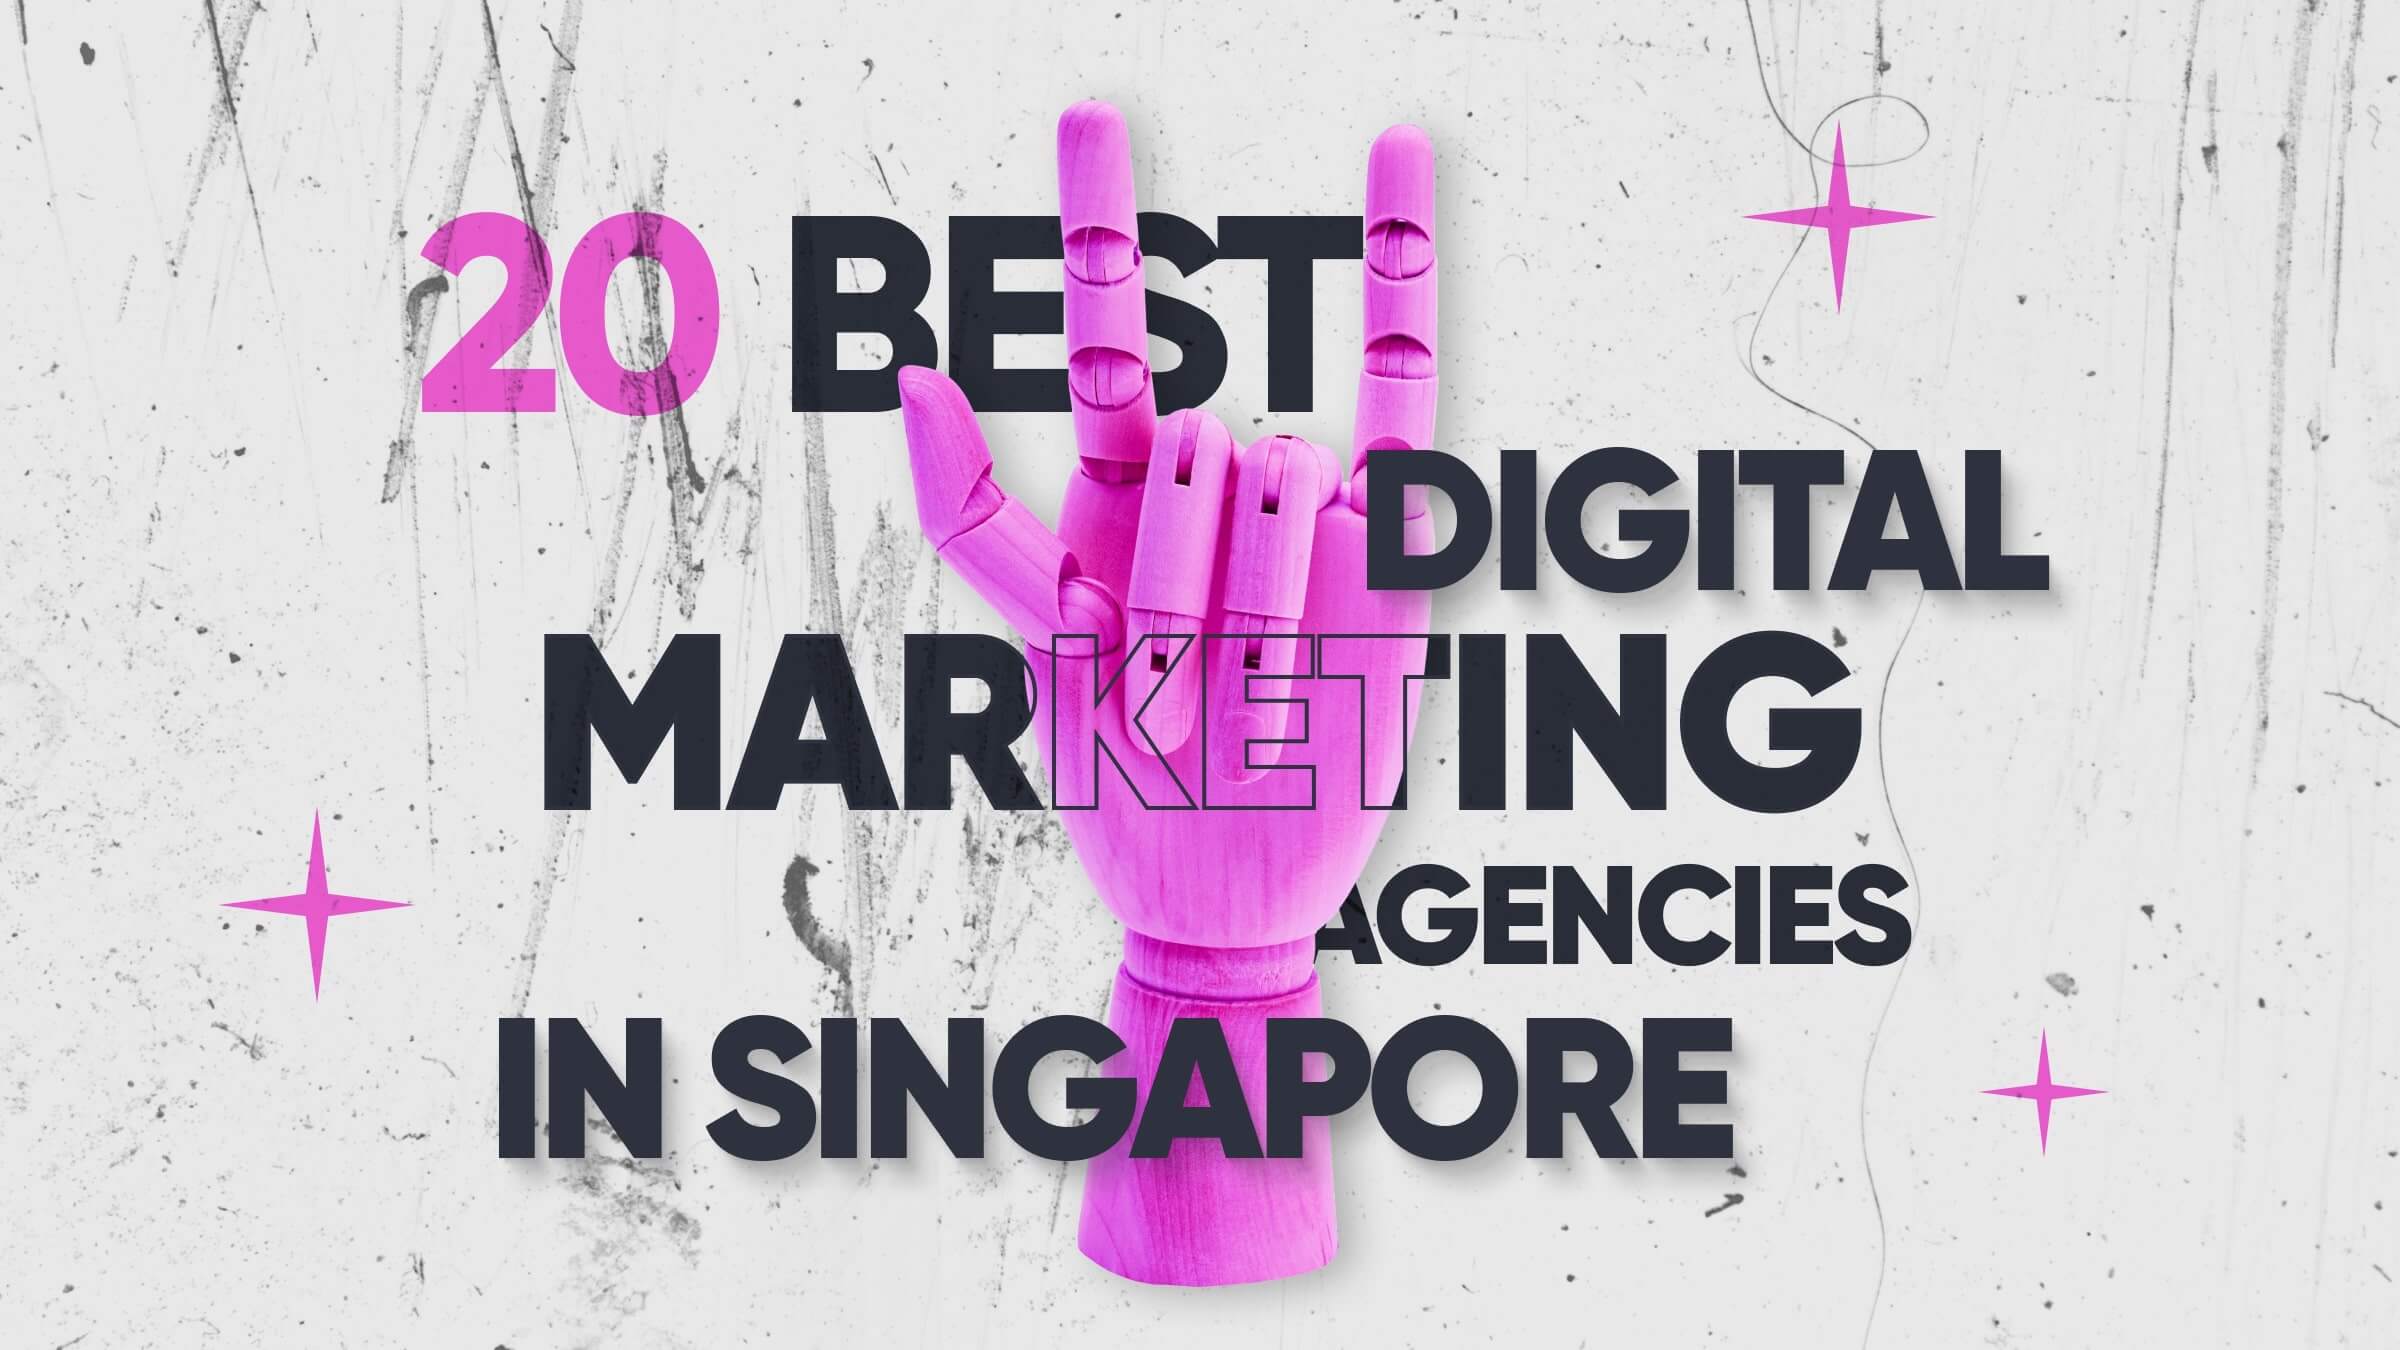 agency in singapore